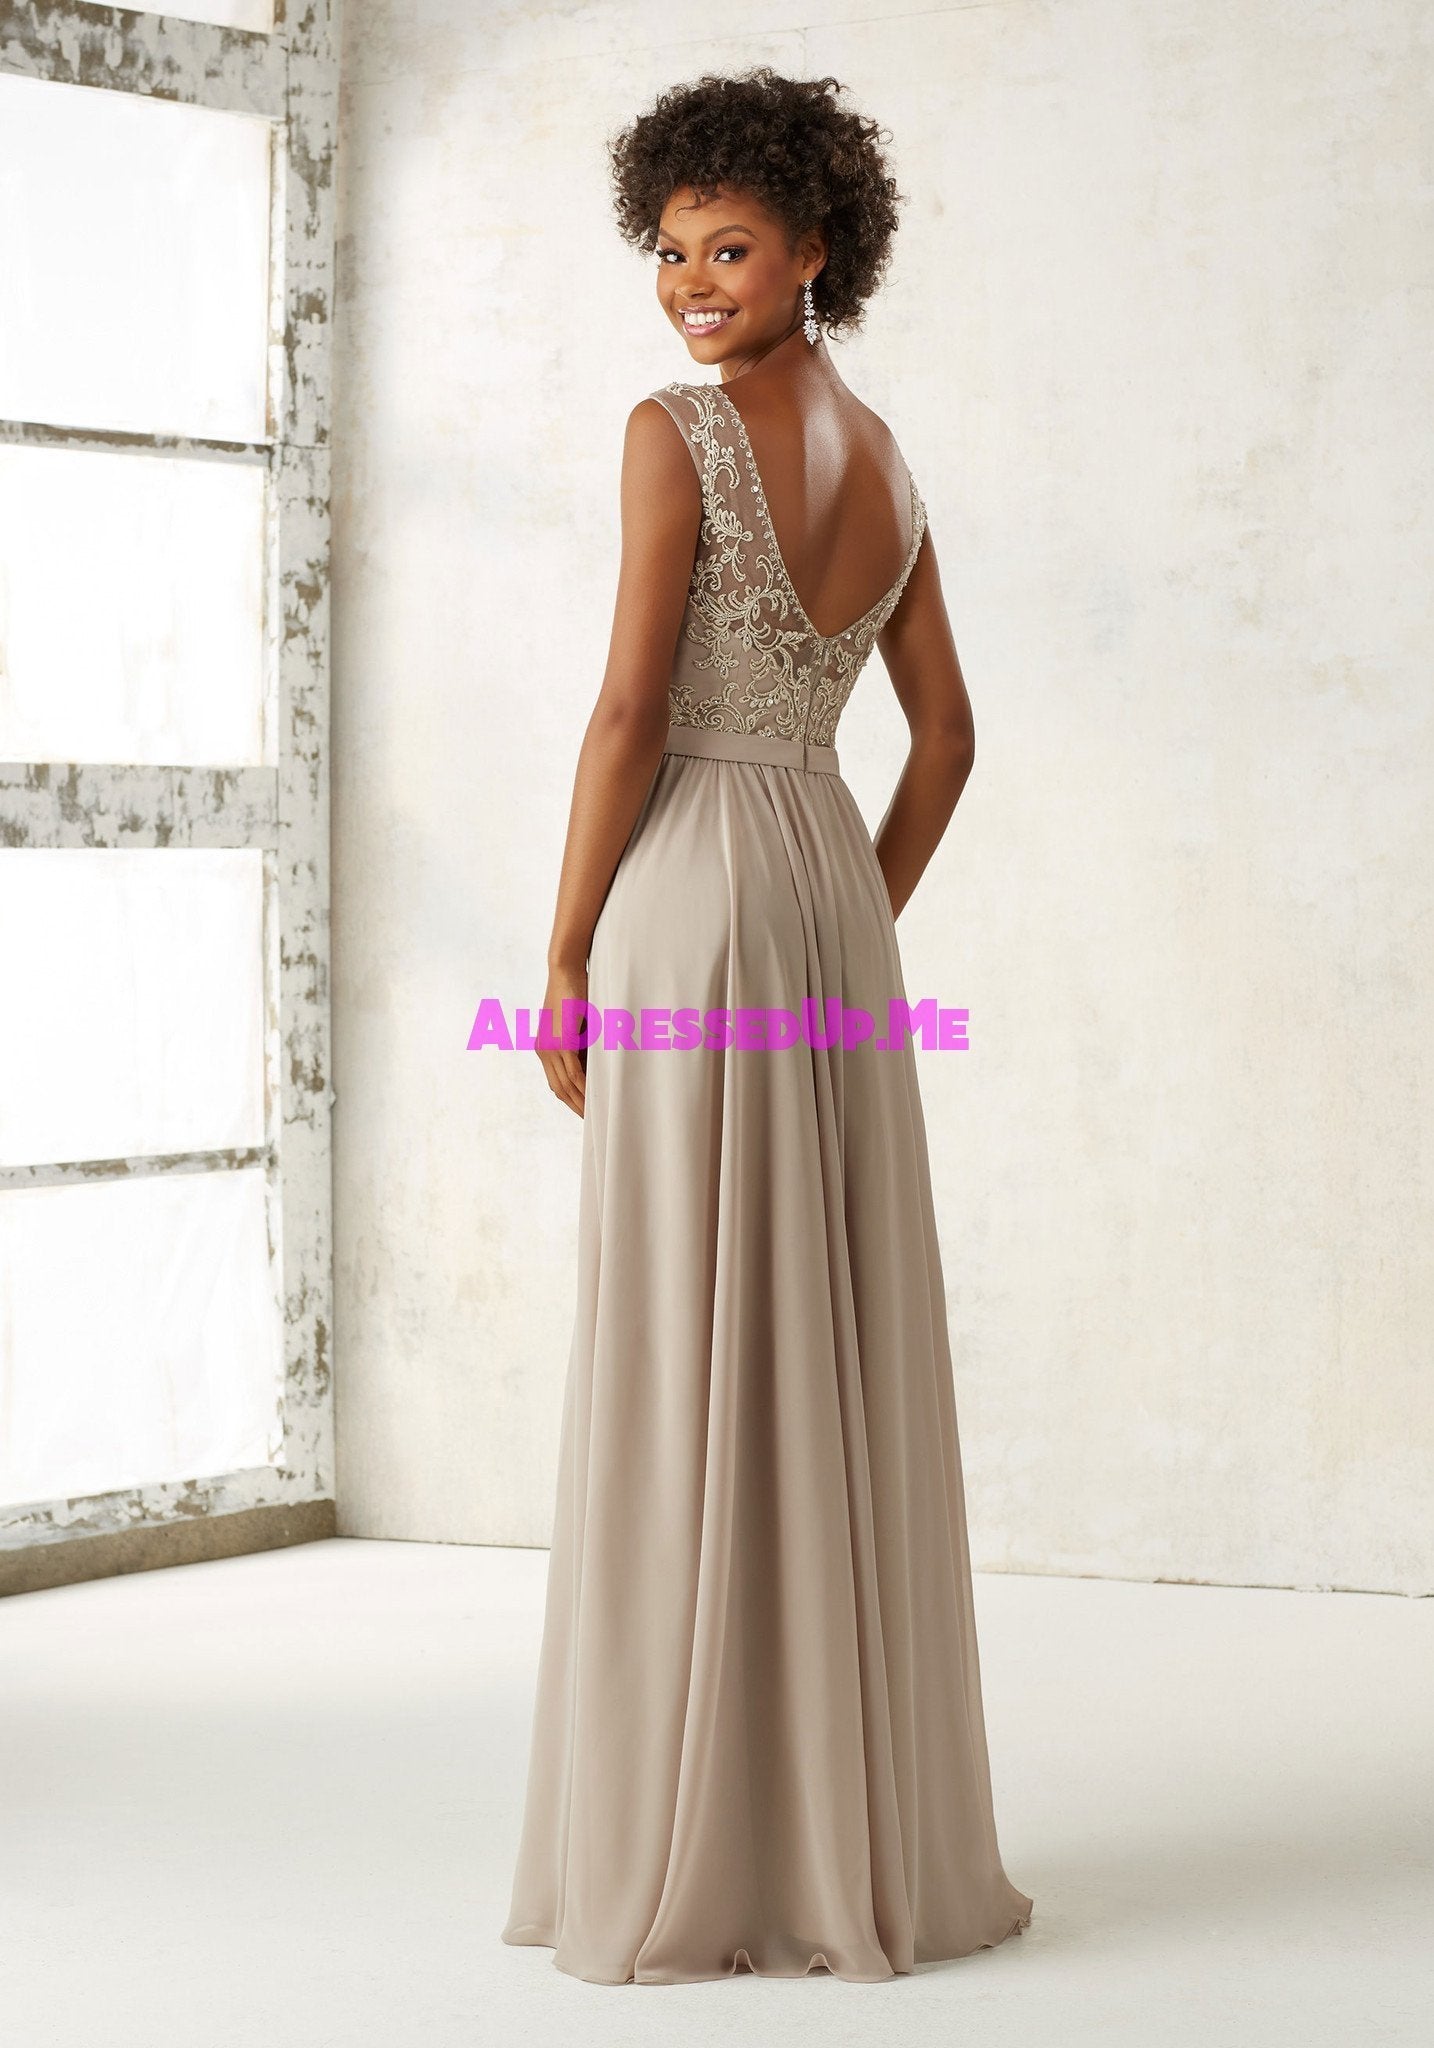 Morilee Bridesmaids Dresses - 21522 - All Dressed Up - Morilee - - Dresses Wedding Chattanooga Hixson Shops Boutiques Tennessee TN Georgia GA MSRP Lowest Prices Sale Discount